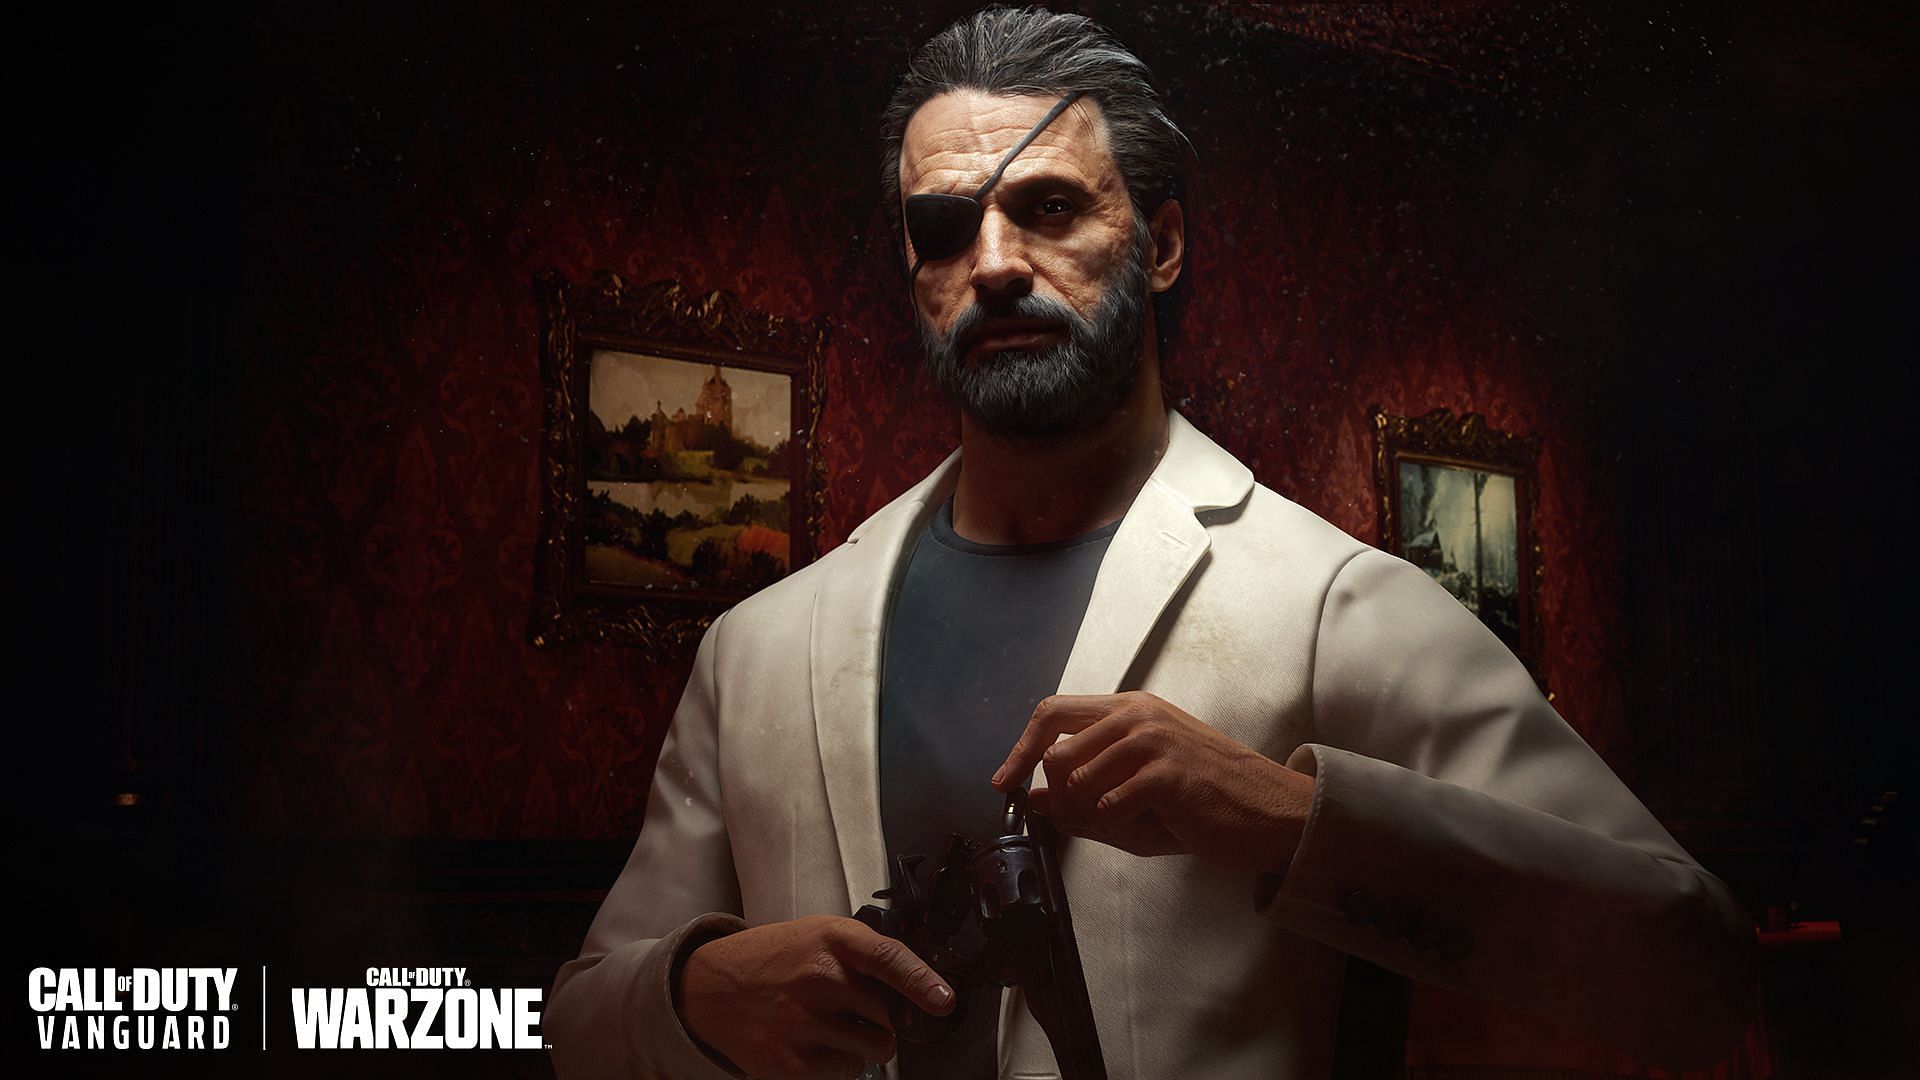 Raul Menendez arrives with his legendary classy look (Image via Activision)